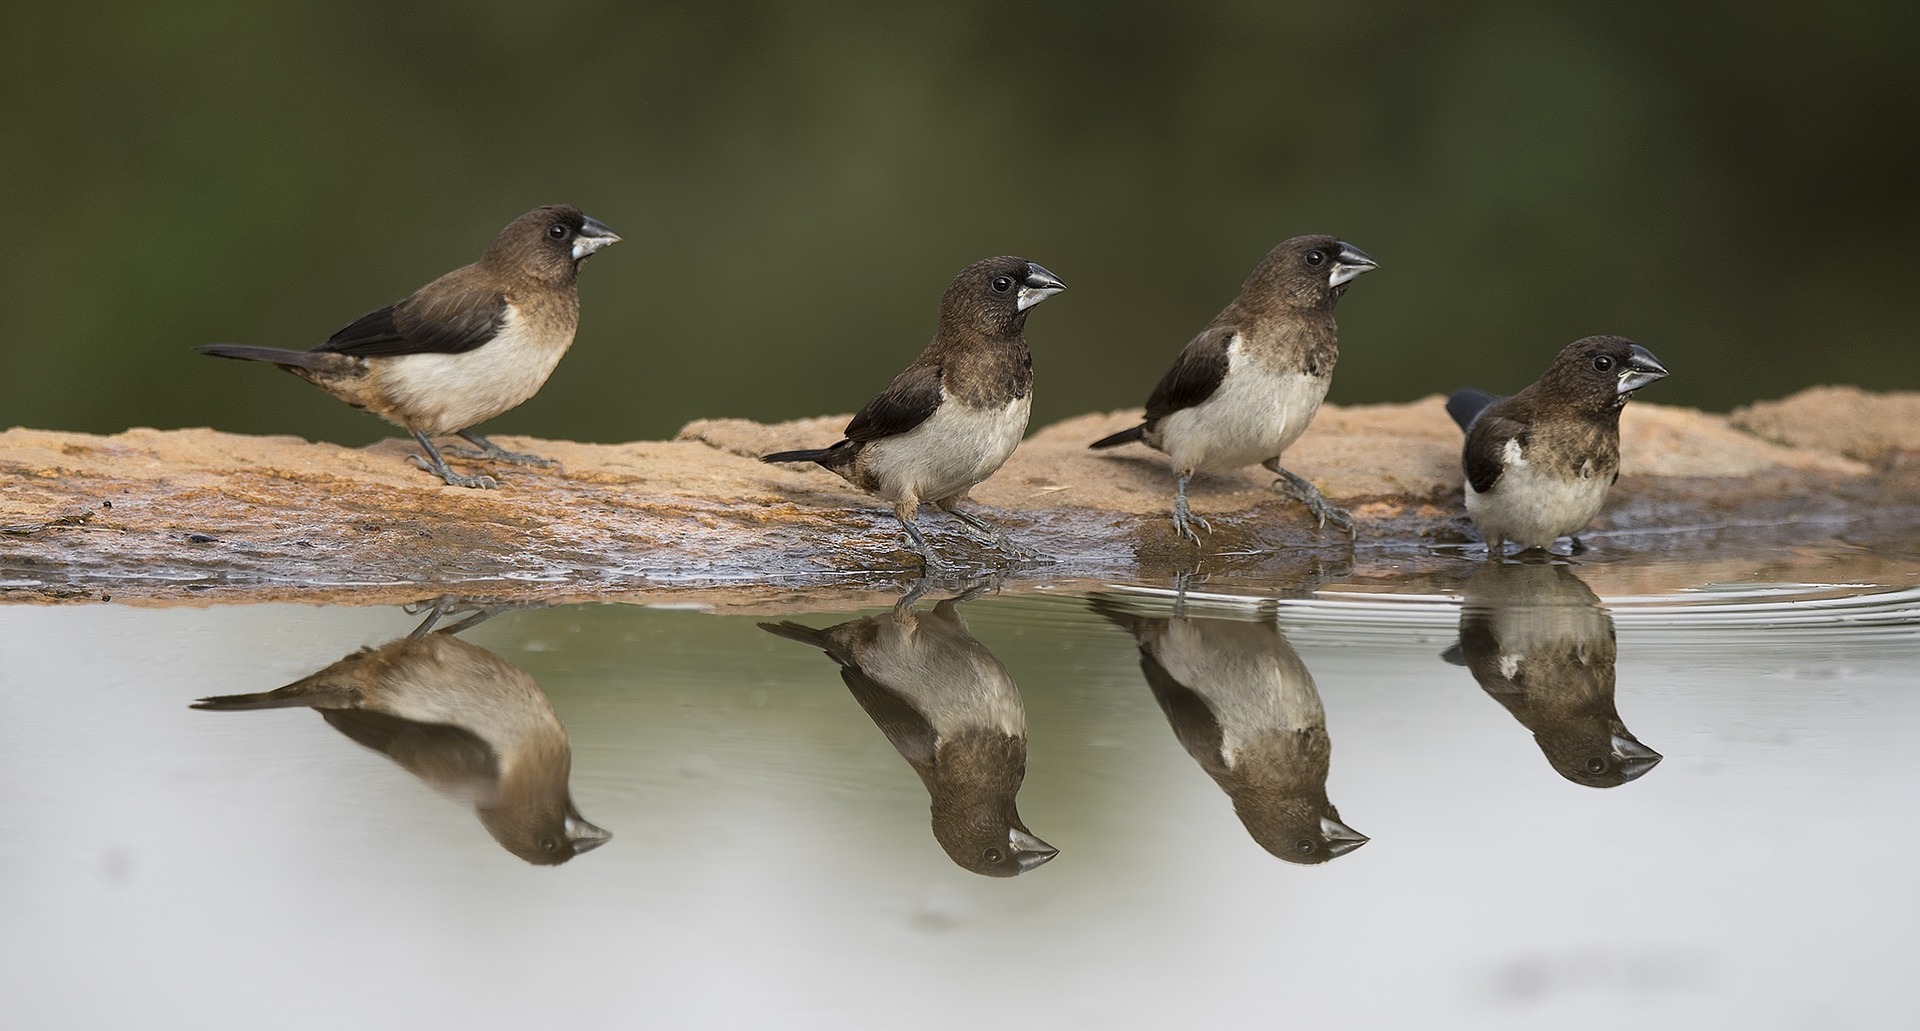 6 Steps To Photographing Birds Successfully